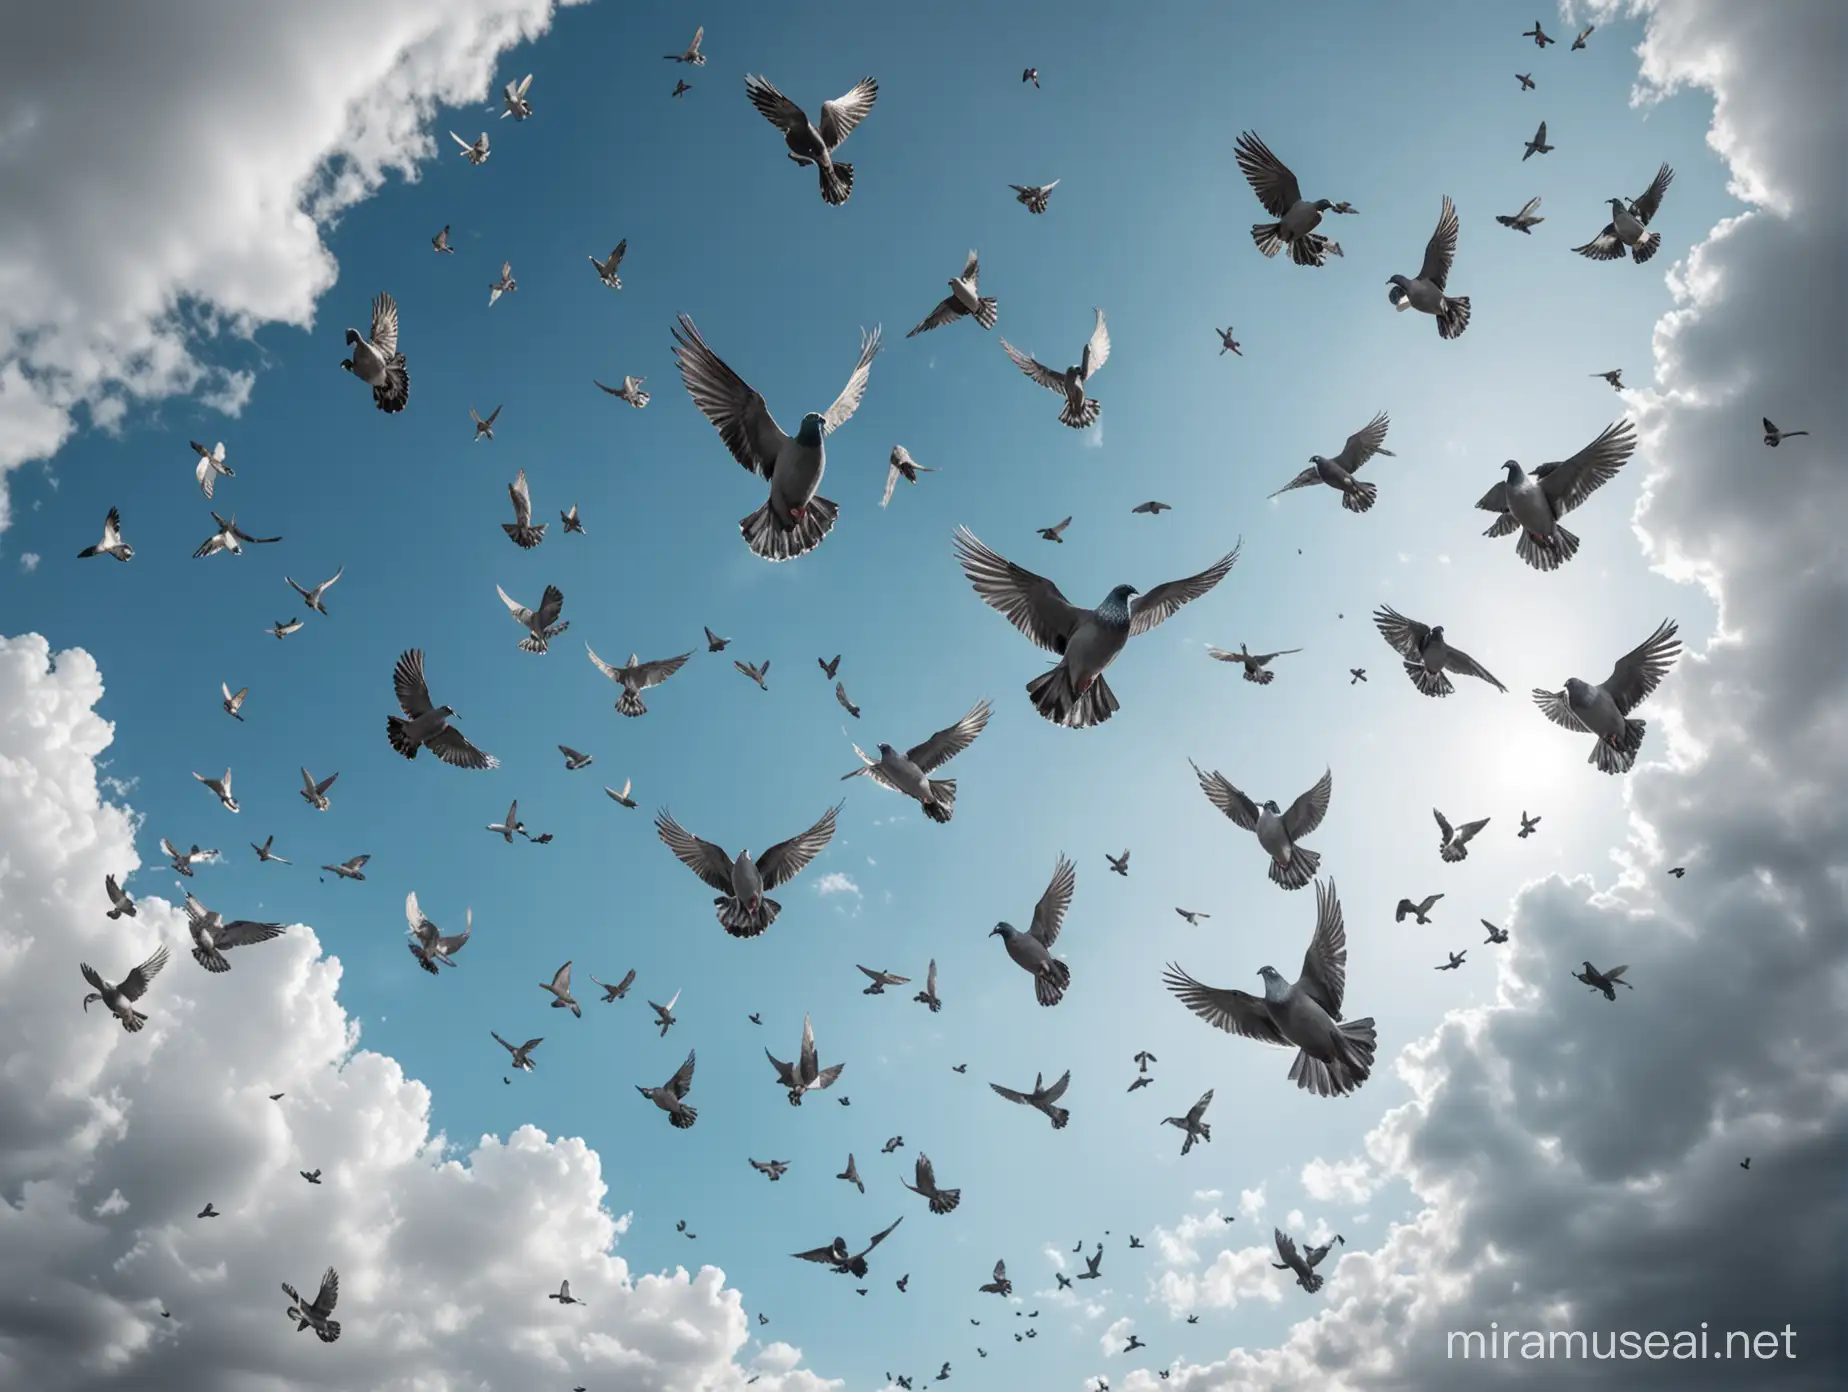 Monochrome Sky with Flying Pigeons Photorealistic View from Below